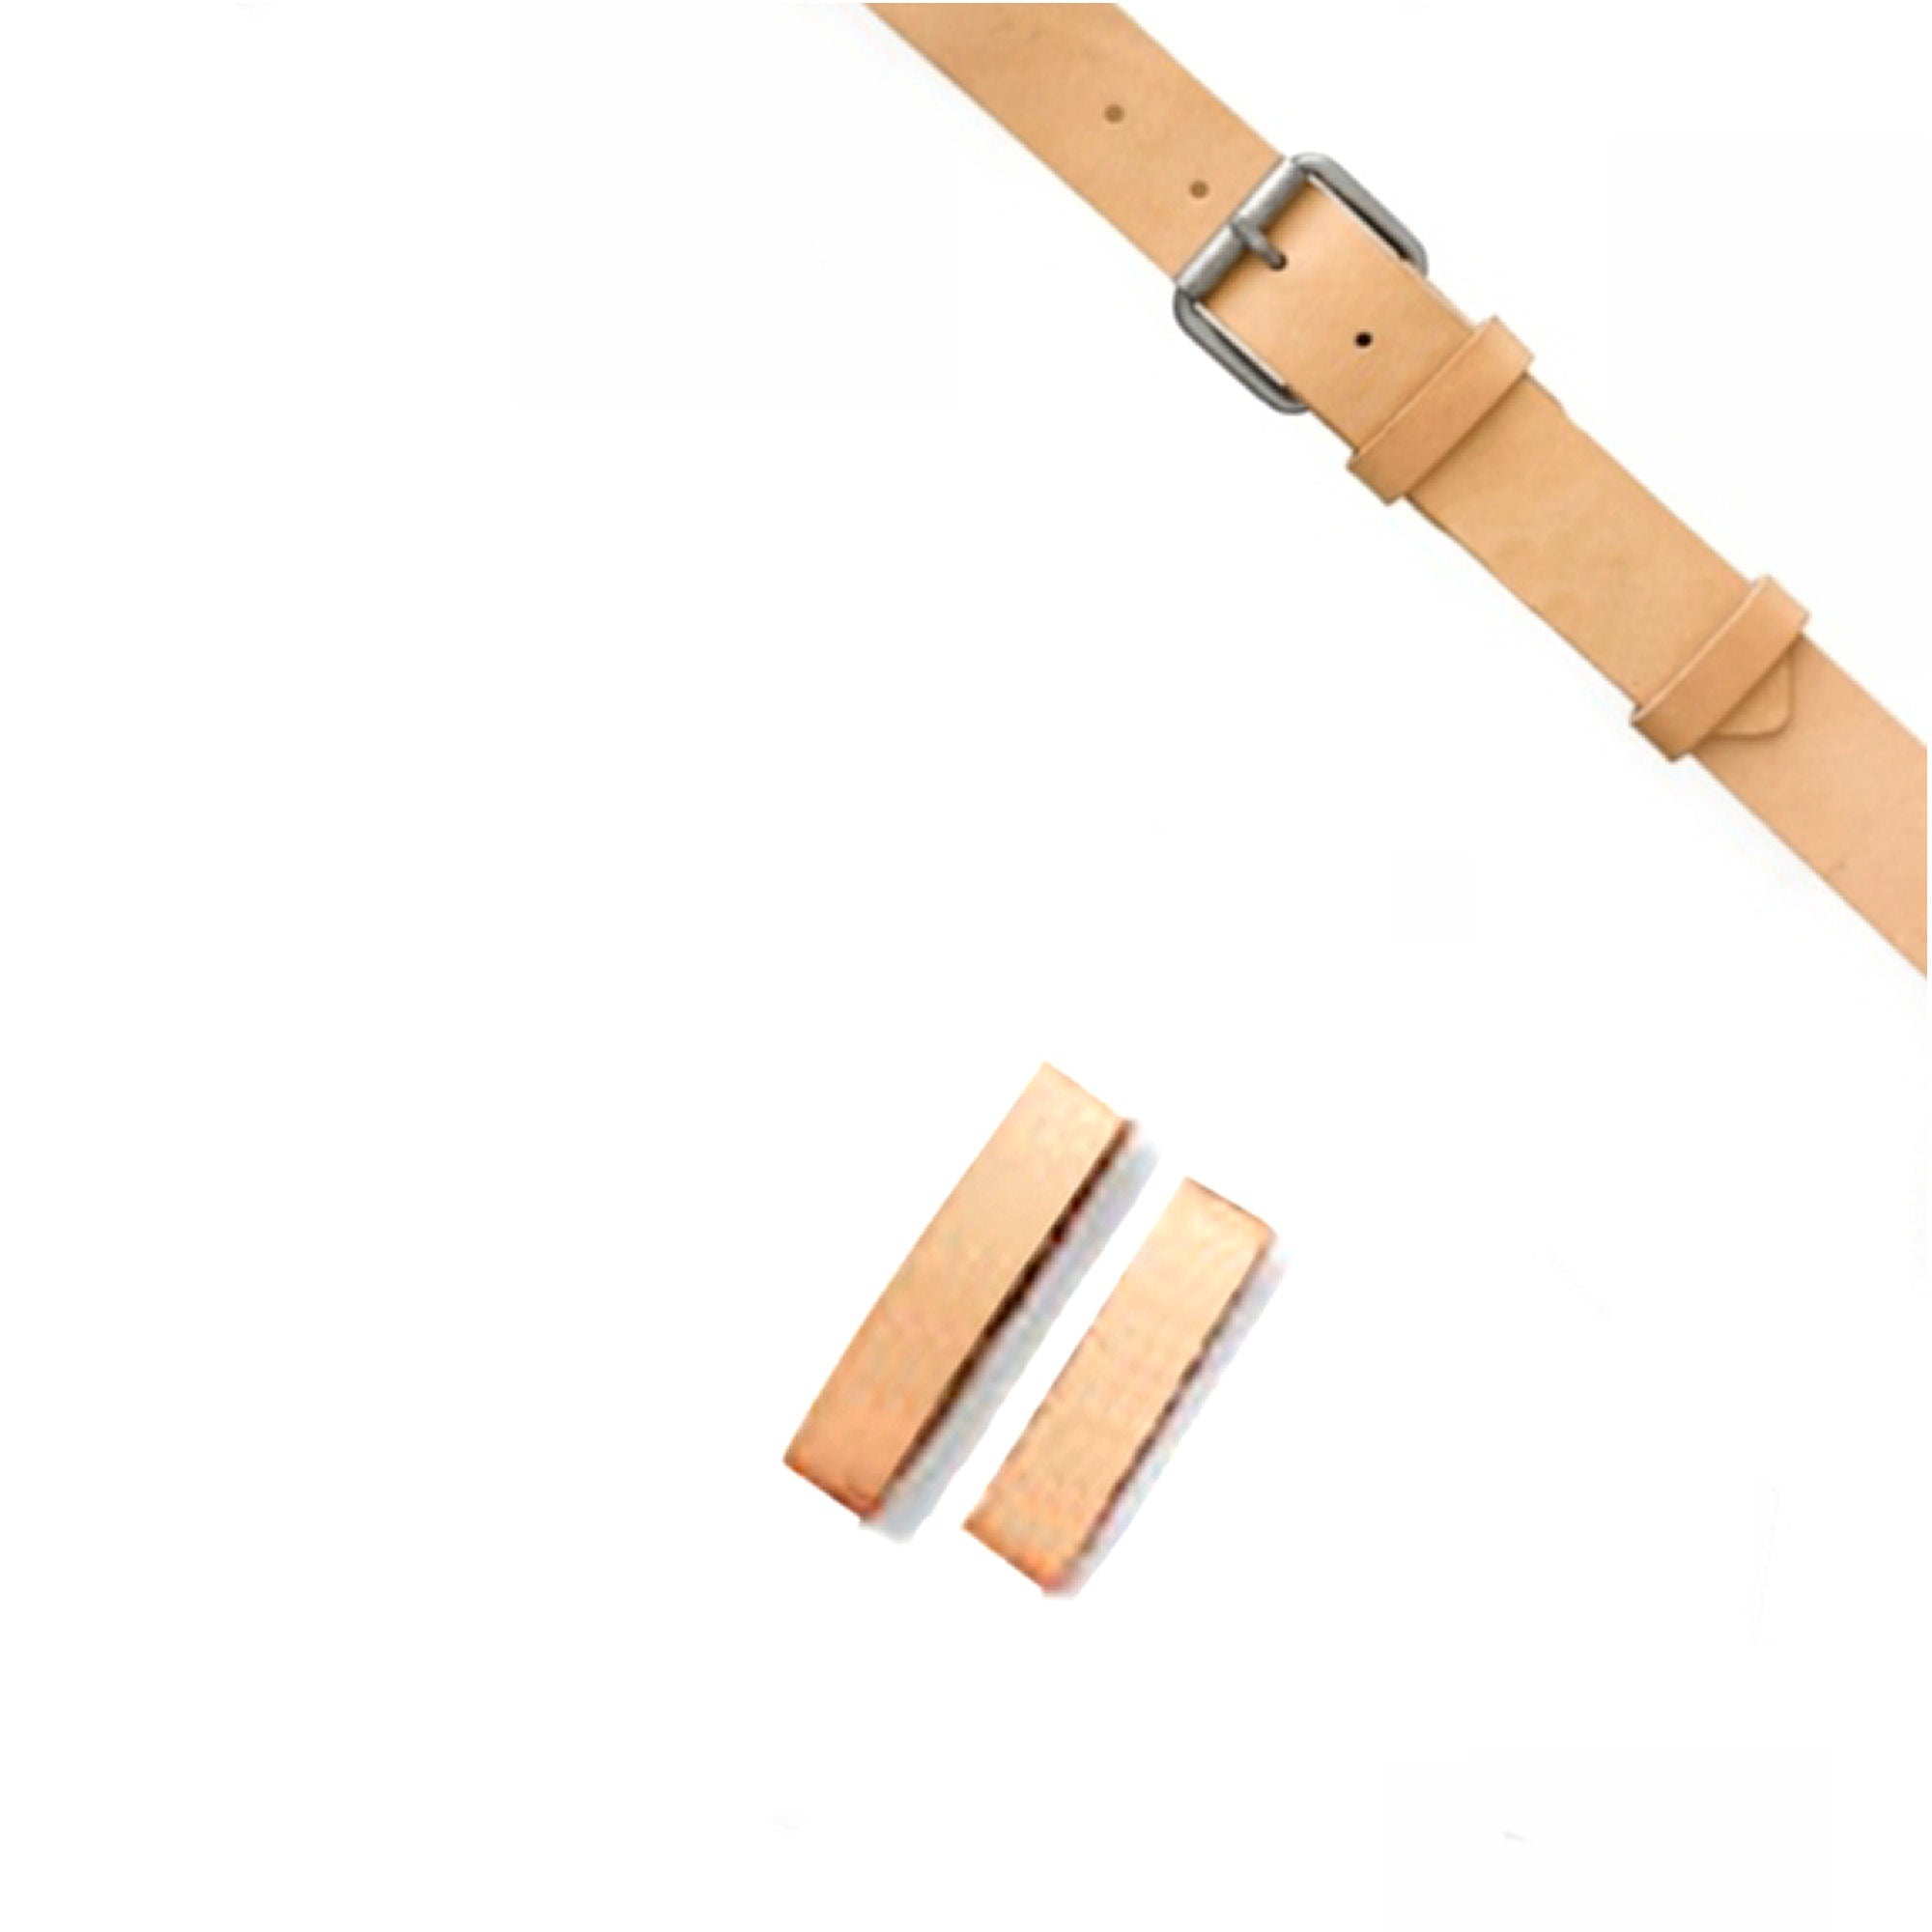 25mm Natural Veg Tan Leather Strap or Belt Keepers